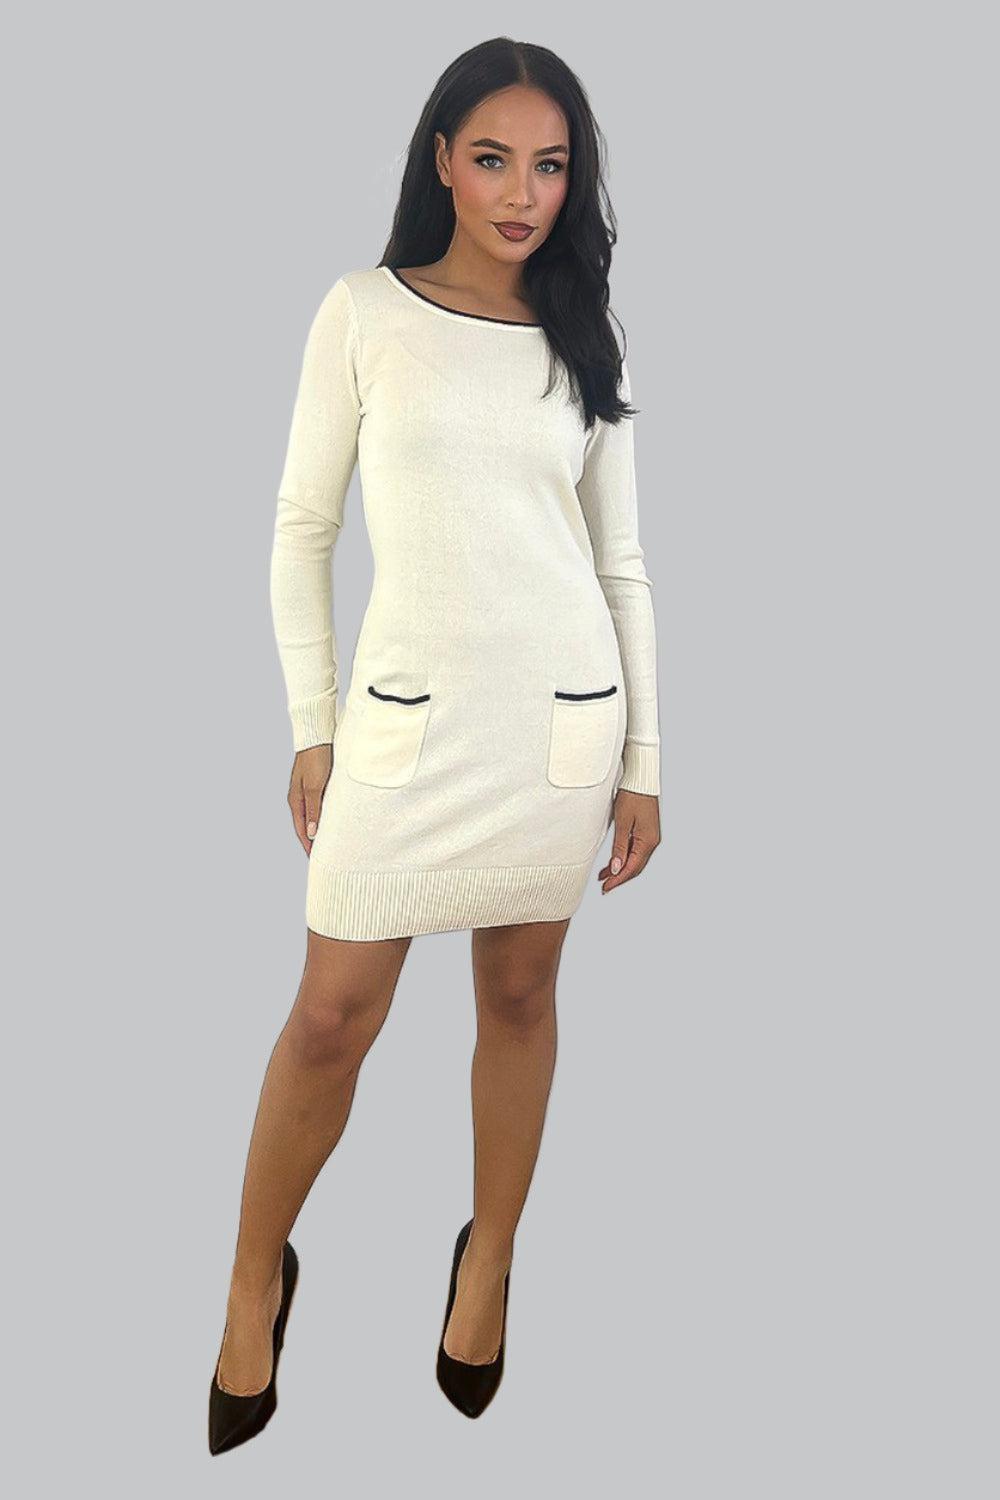 Contrast Details Bodycon Knitted Dress-SinglePrice